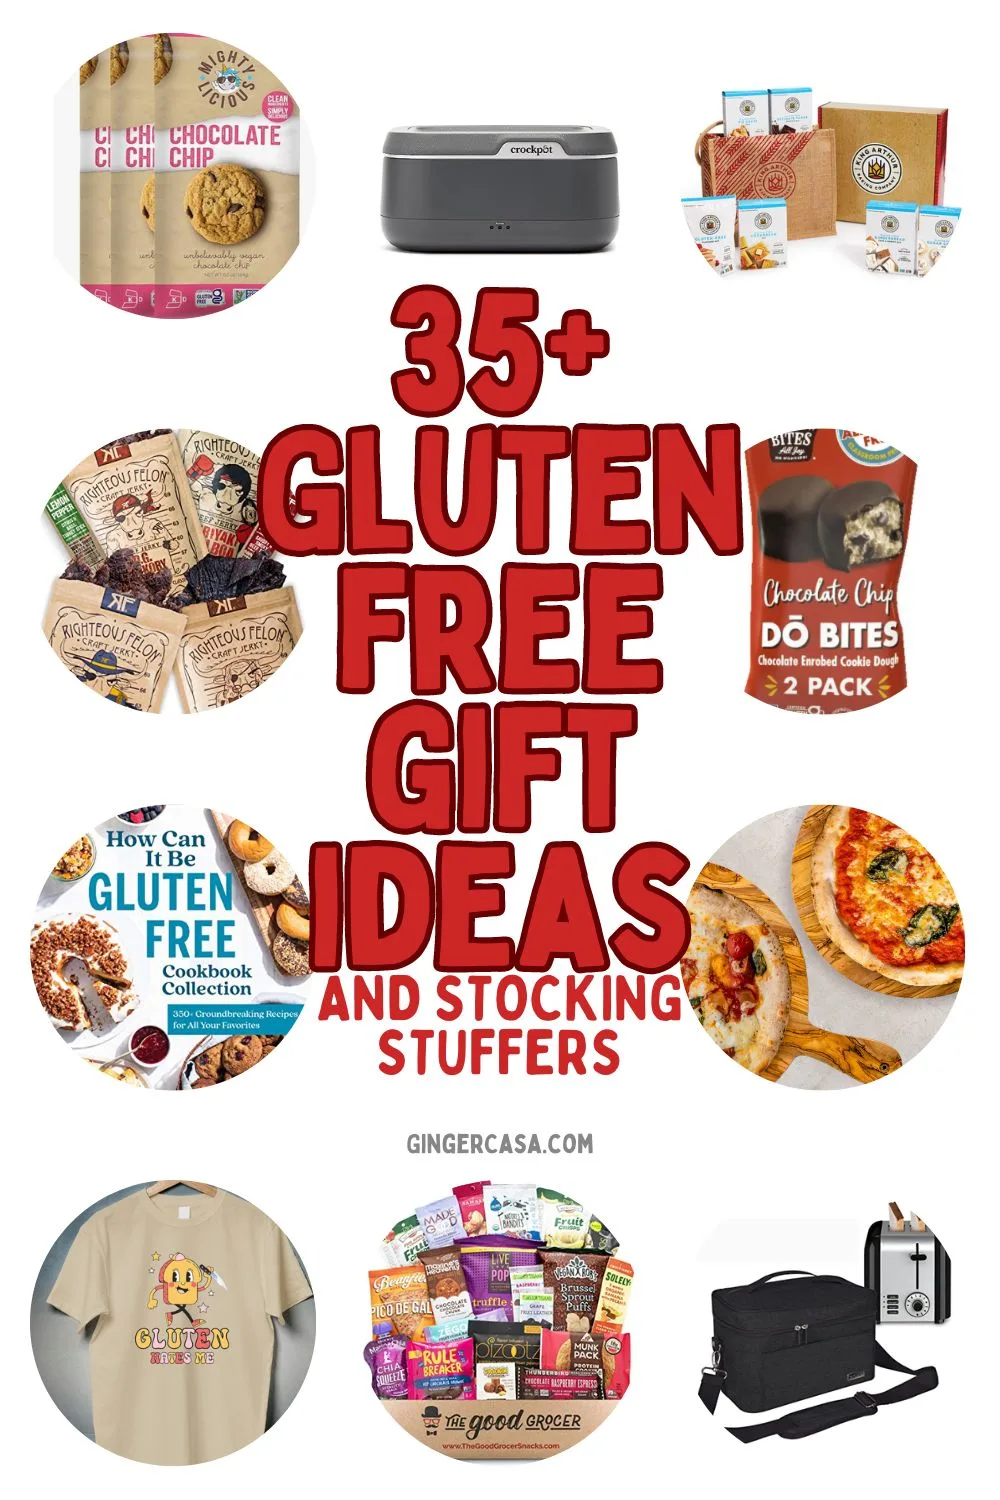 Gluten Free Gift Guide 2023 - curated by GF expert gfJules